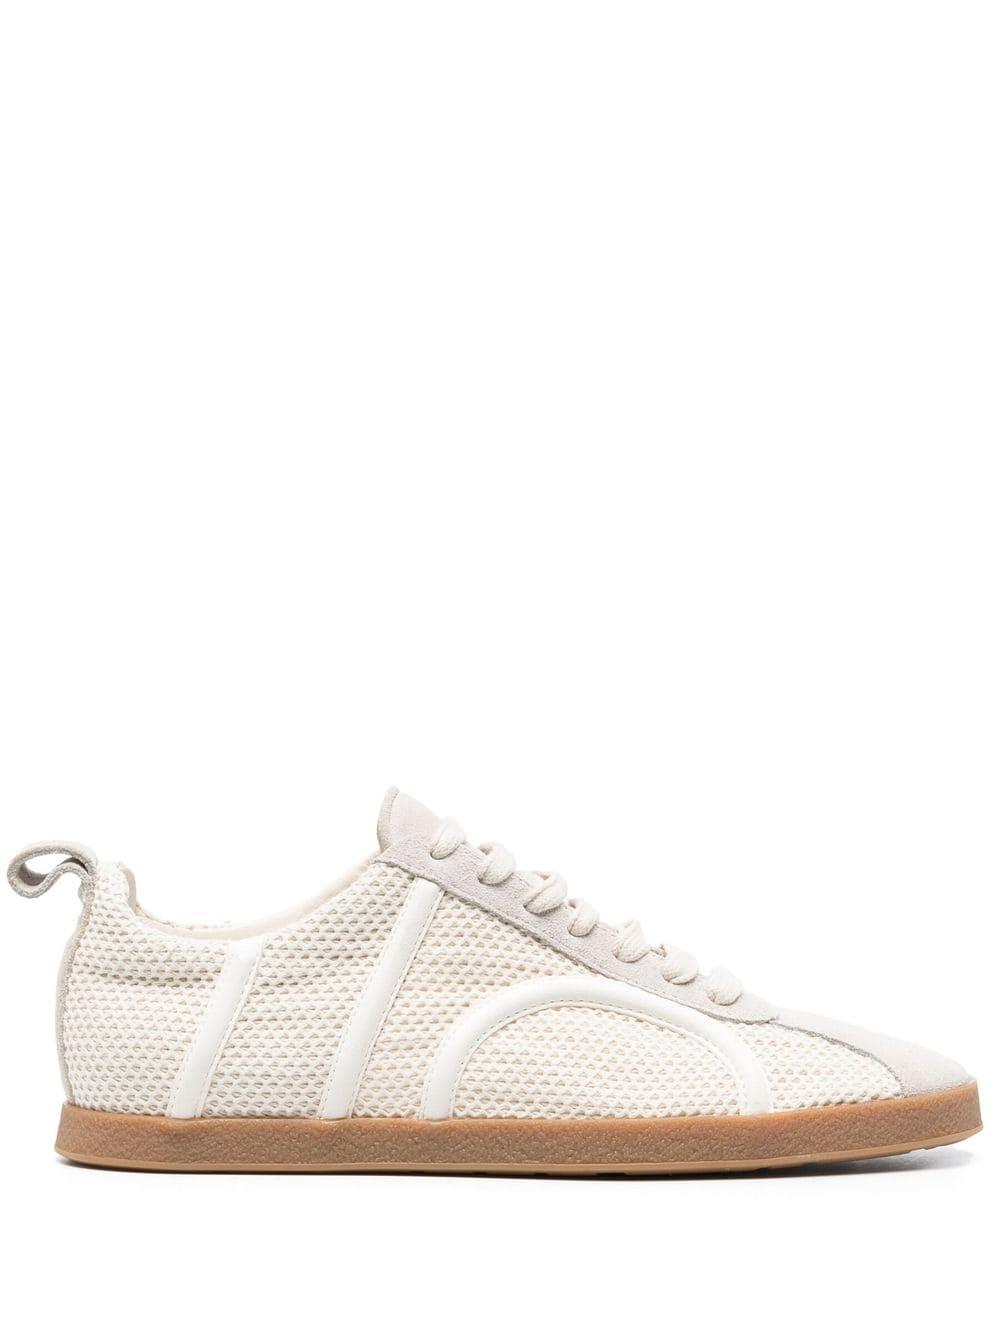 Totême Panelled Mesh Sneakers in White | Lyst